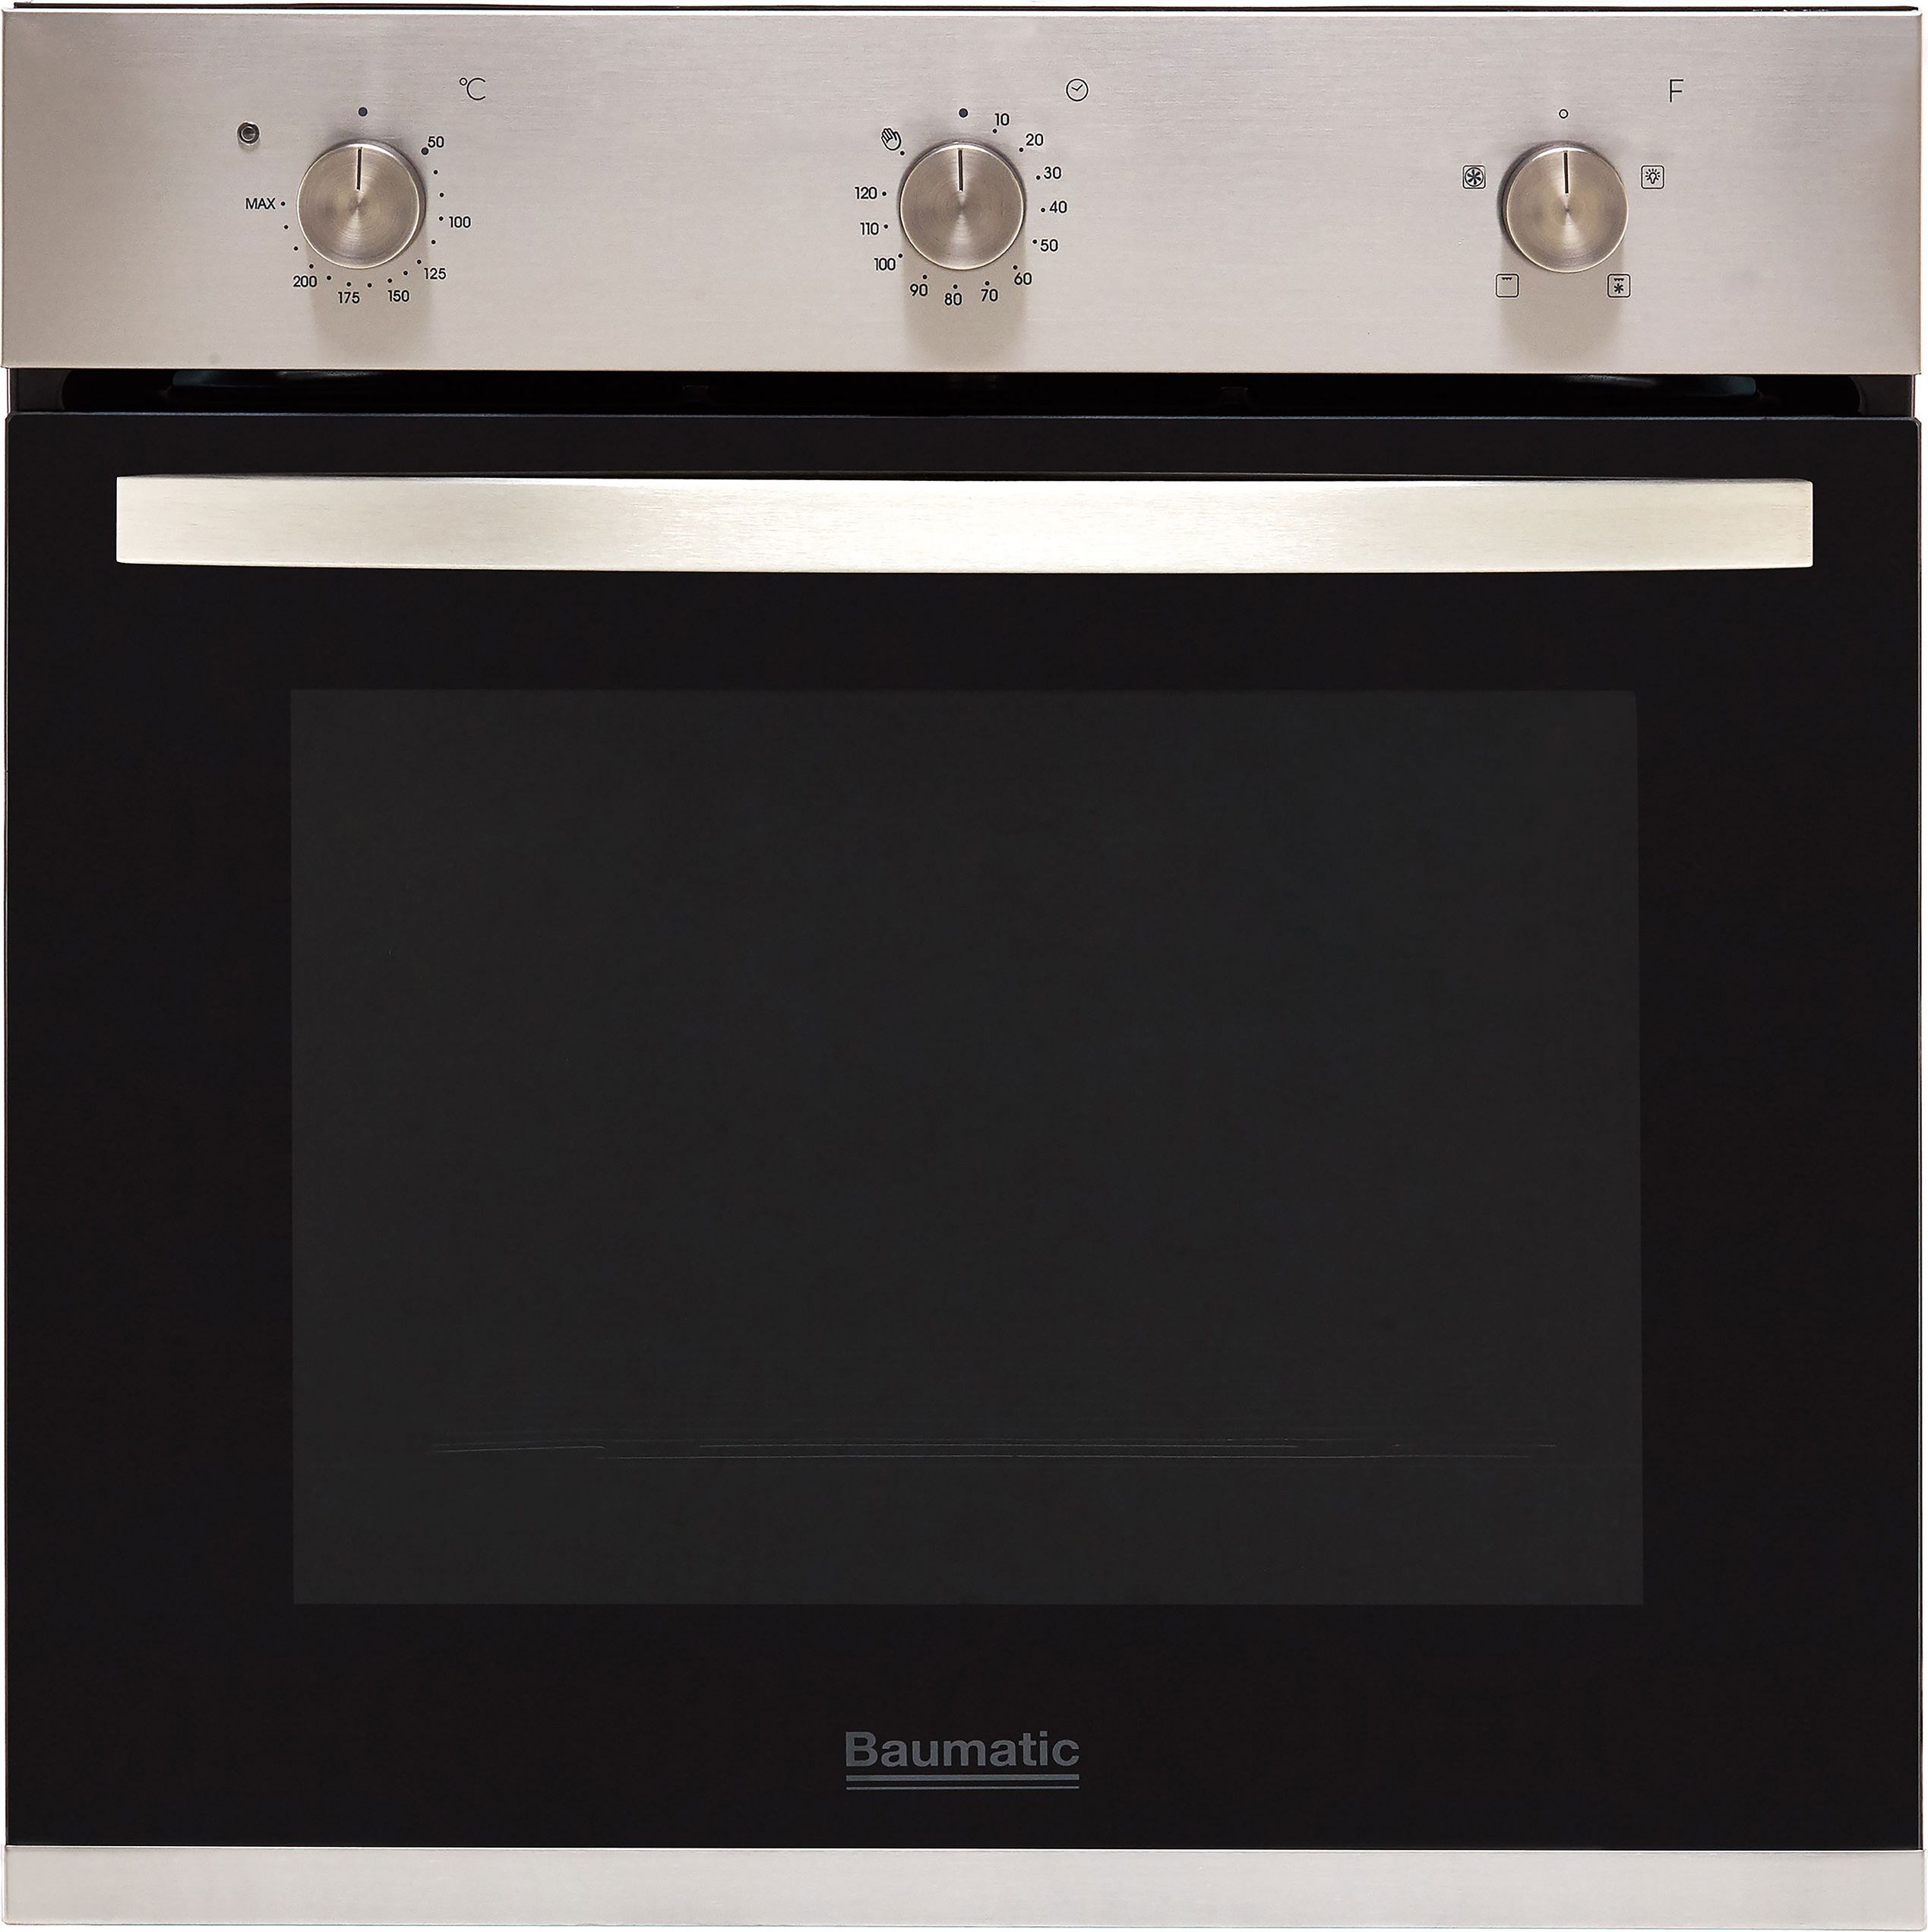 Baumatic BOFMU604X Built In Electric Single Oven - Stainless Steel - A Rated, Stainless Steel